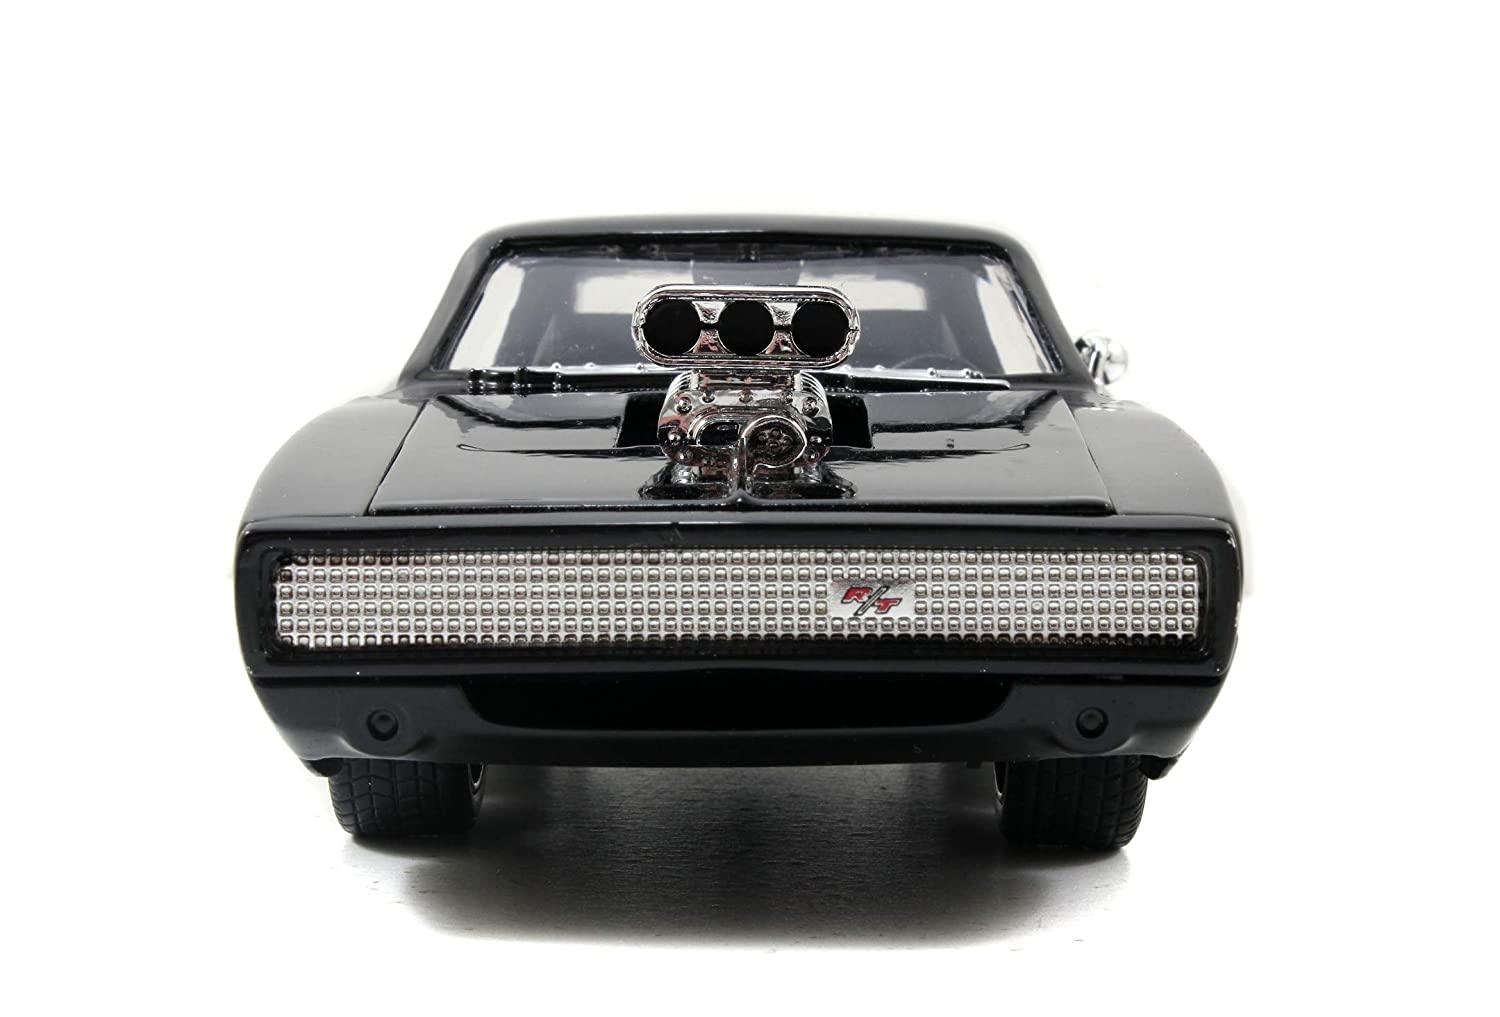 Jada Fast & Furious 1:24 Scale 1970 Dodge Charger Diecast Car and Dom Toretto Diecast Figure